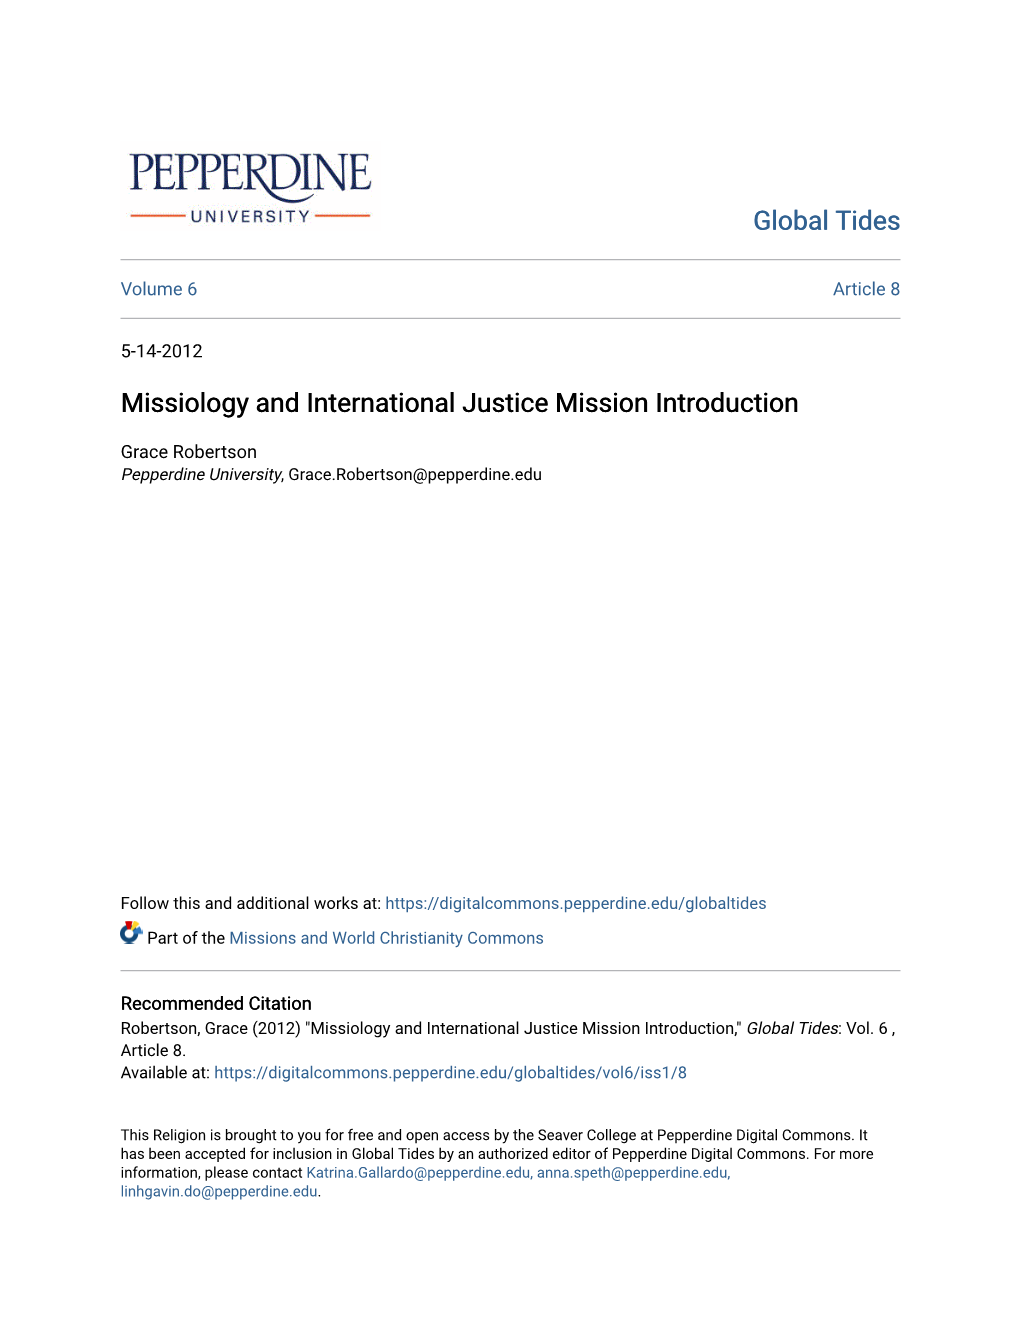 Missiology and International Justice Mission Introduction